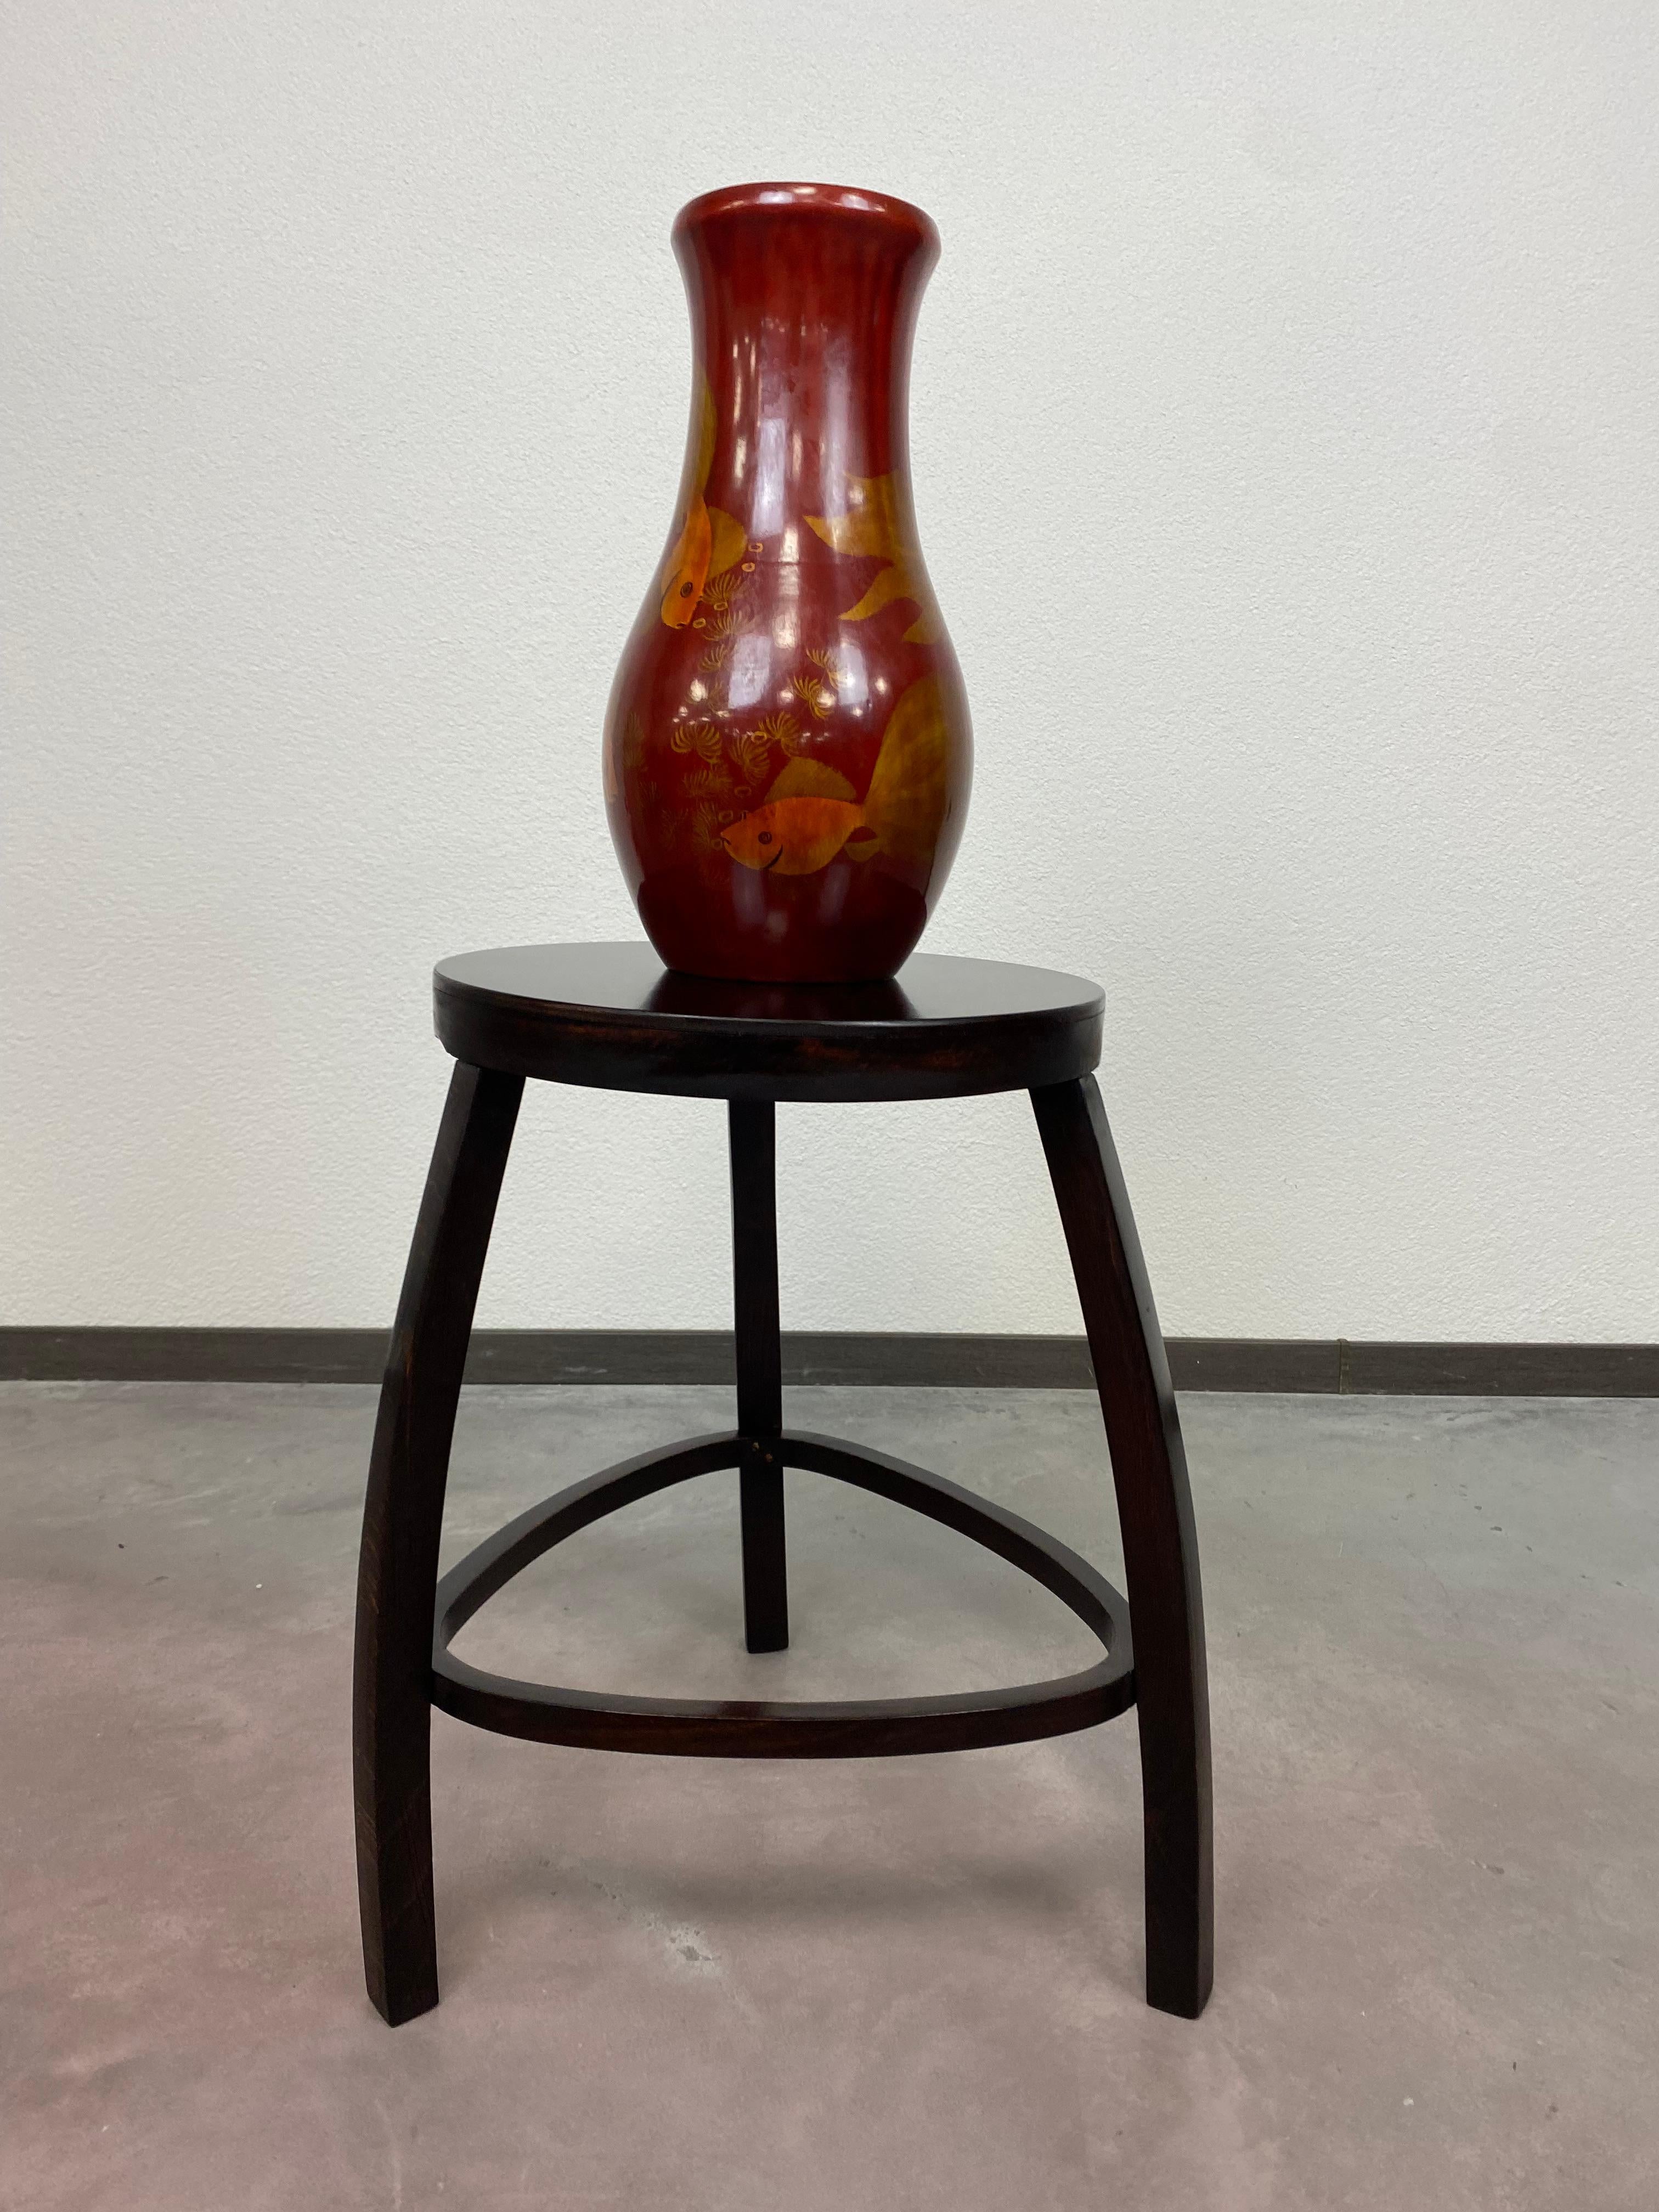 Secession plant stand no.9537 by Otto Wagner for Thonet professionally stained and repolished.